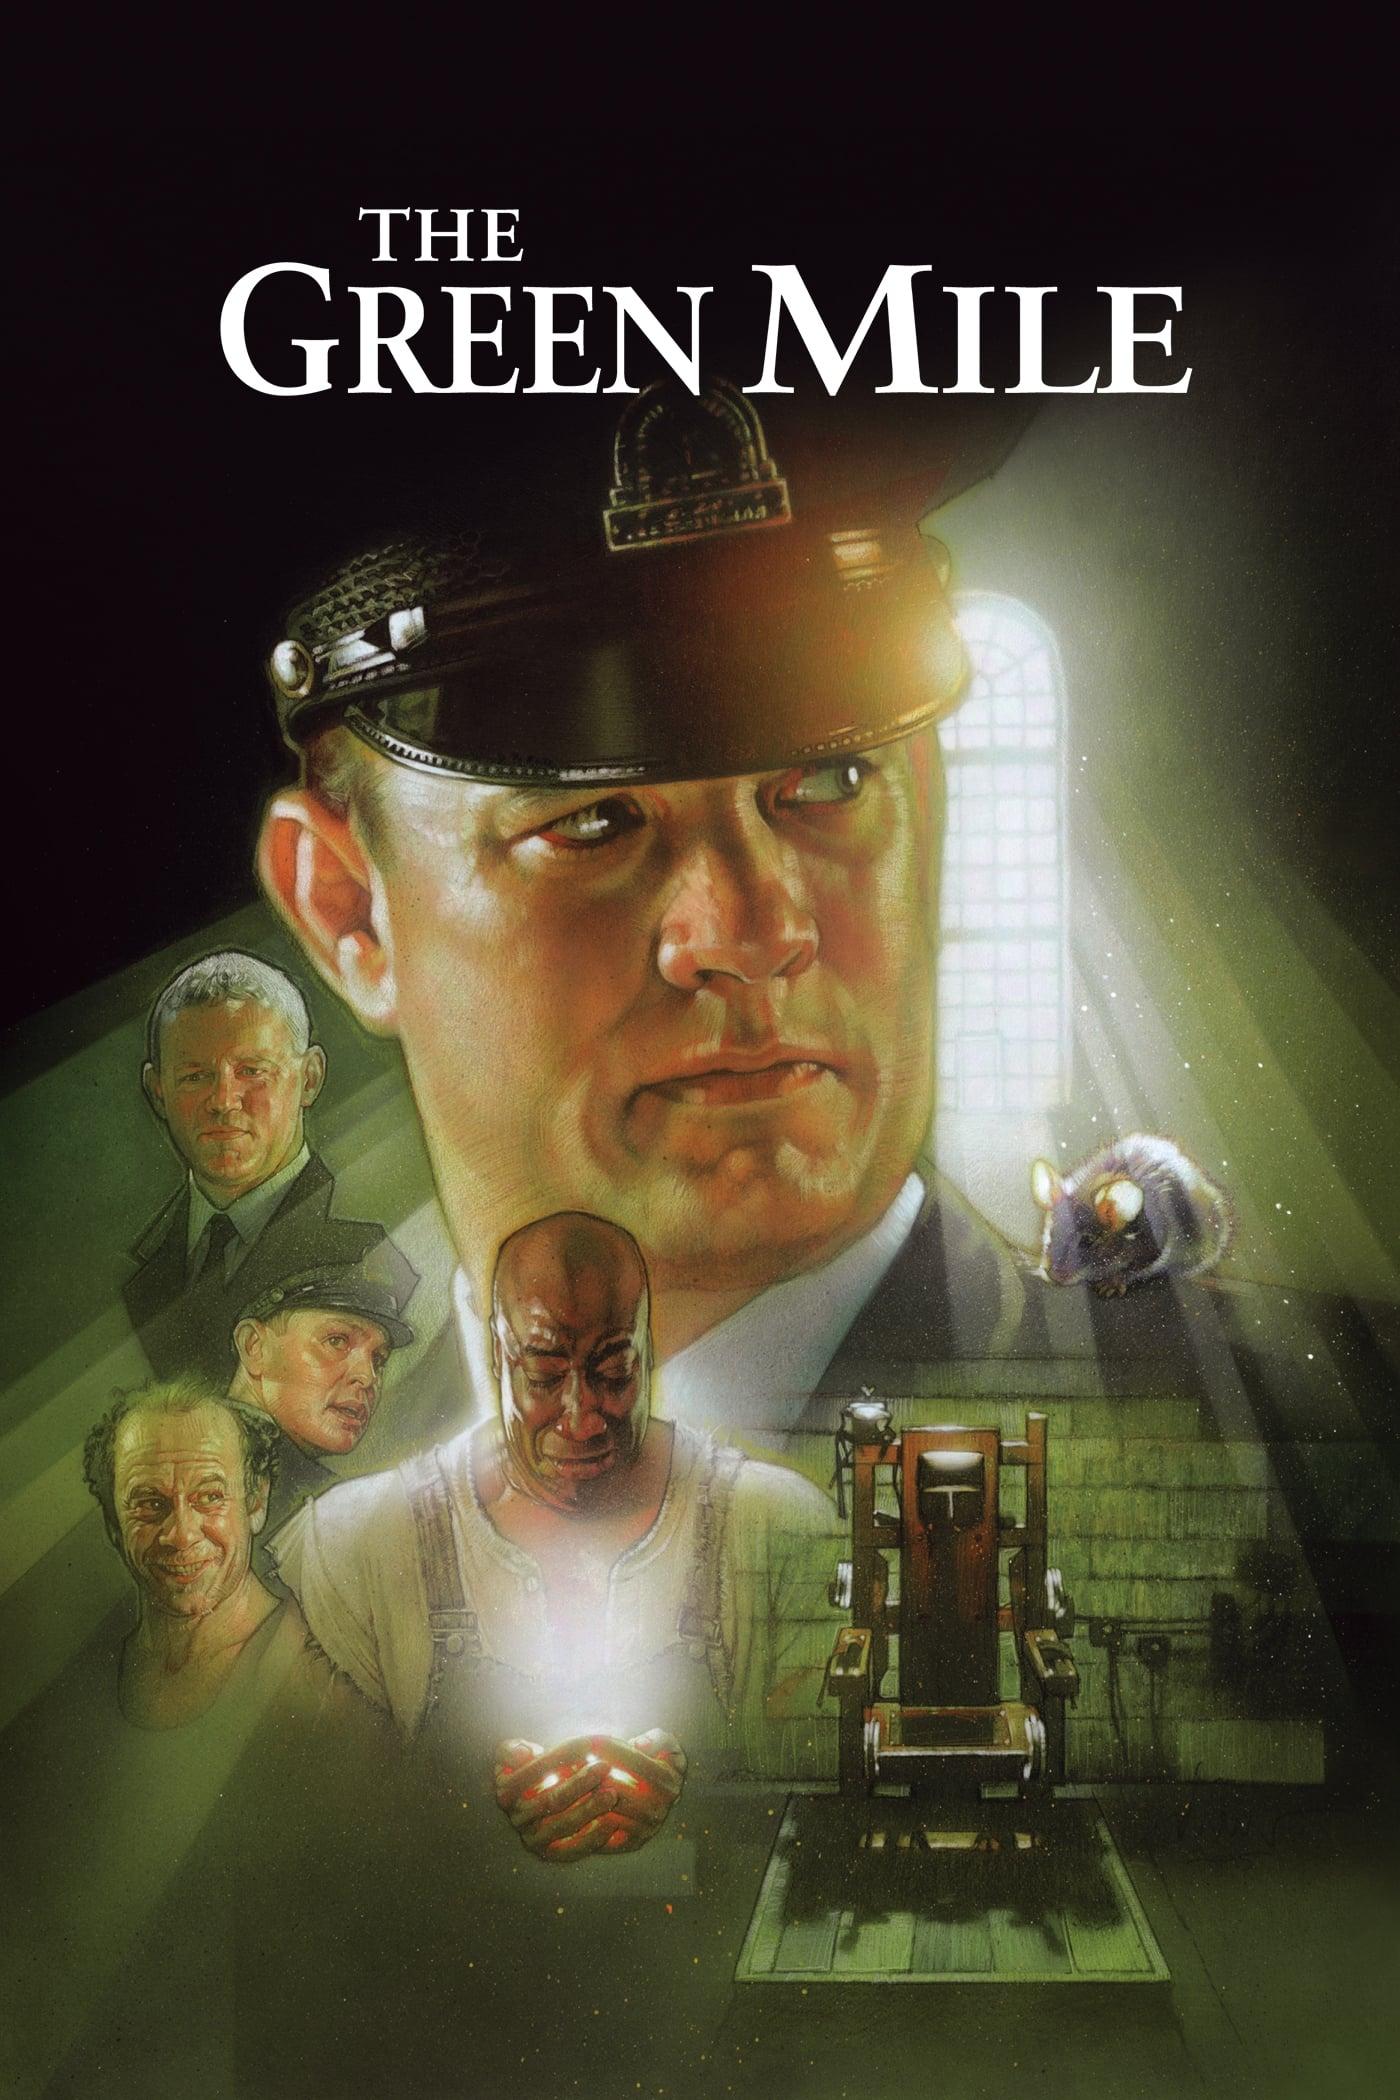 Movie poster of "The Green Mile"